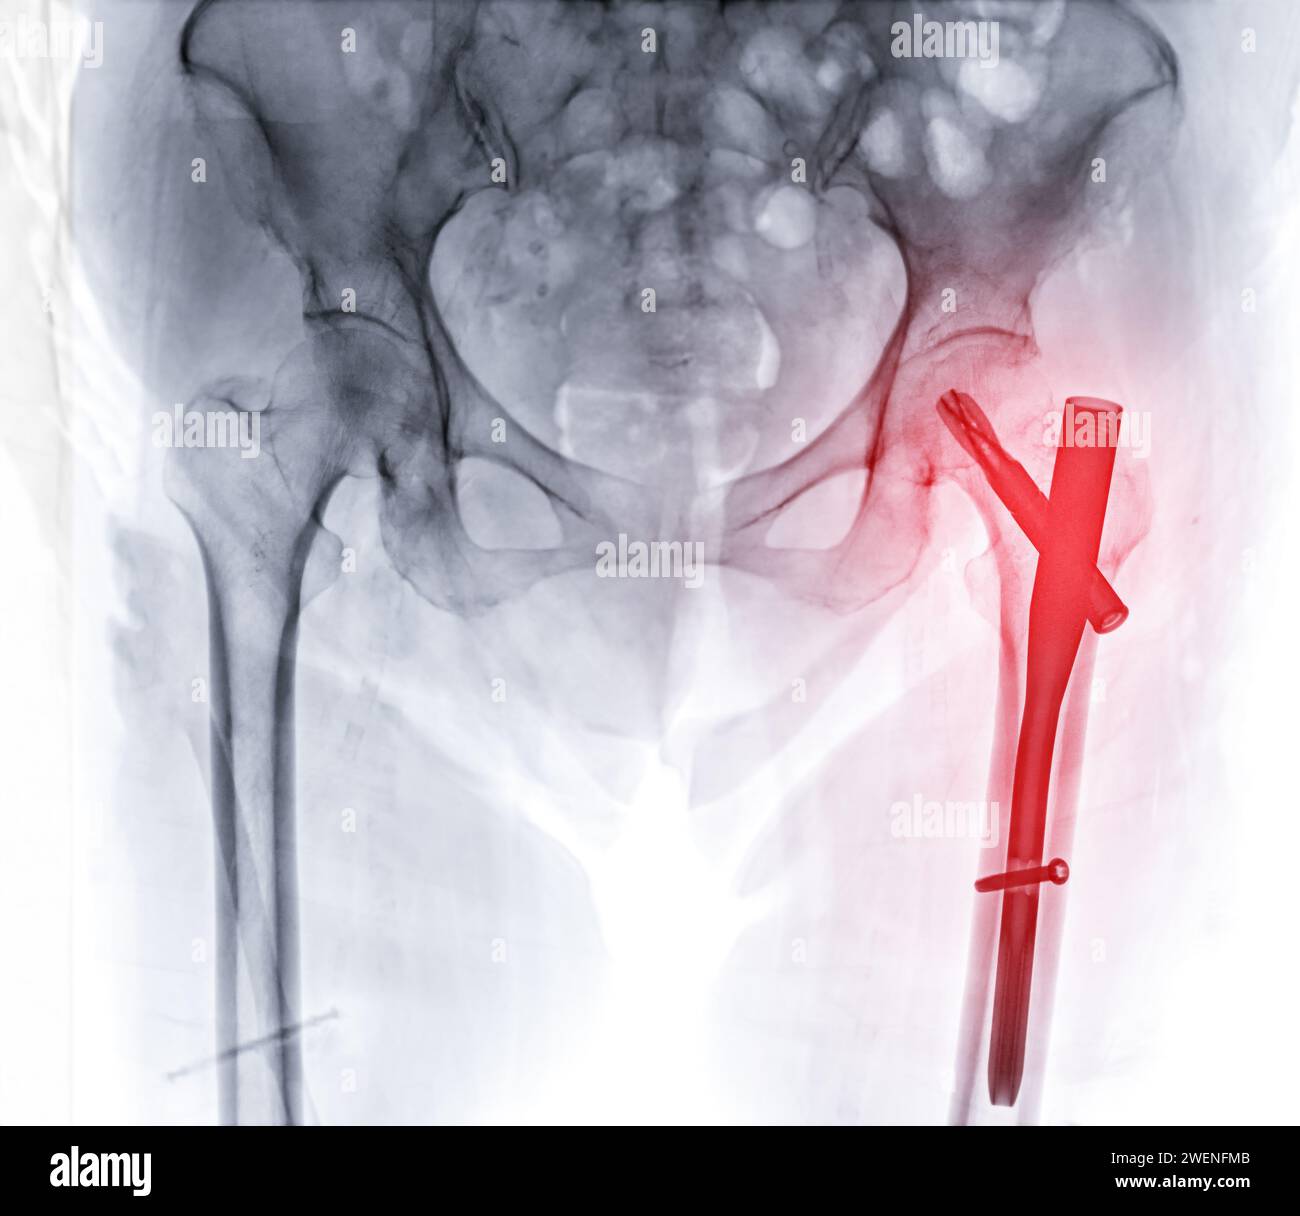 An X-ray reveals both hip joints with hemiarthroplasty, showcasing the success of the surgical procedure and providing a visual testament to the resto Stock Photo